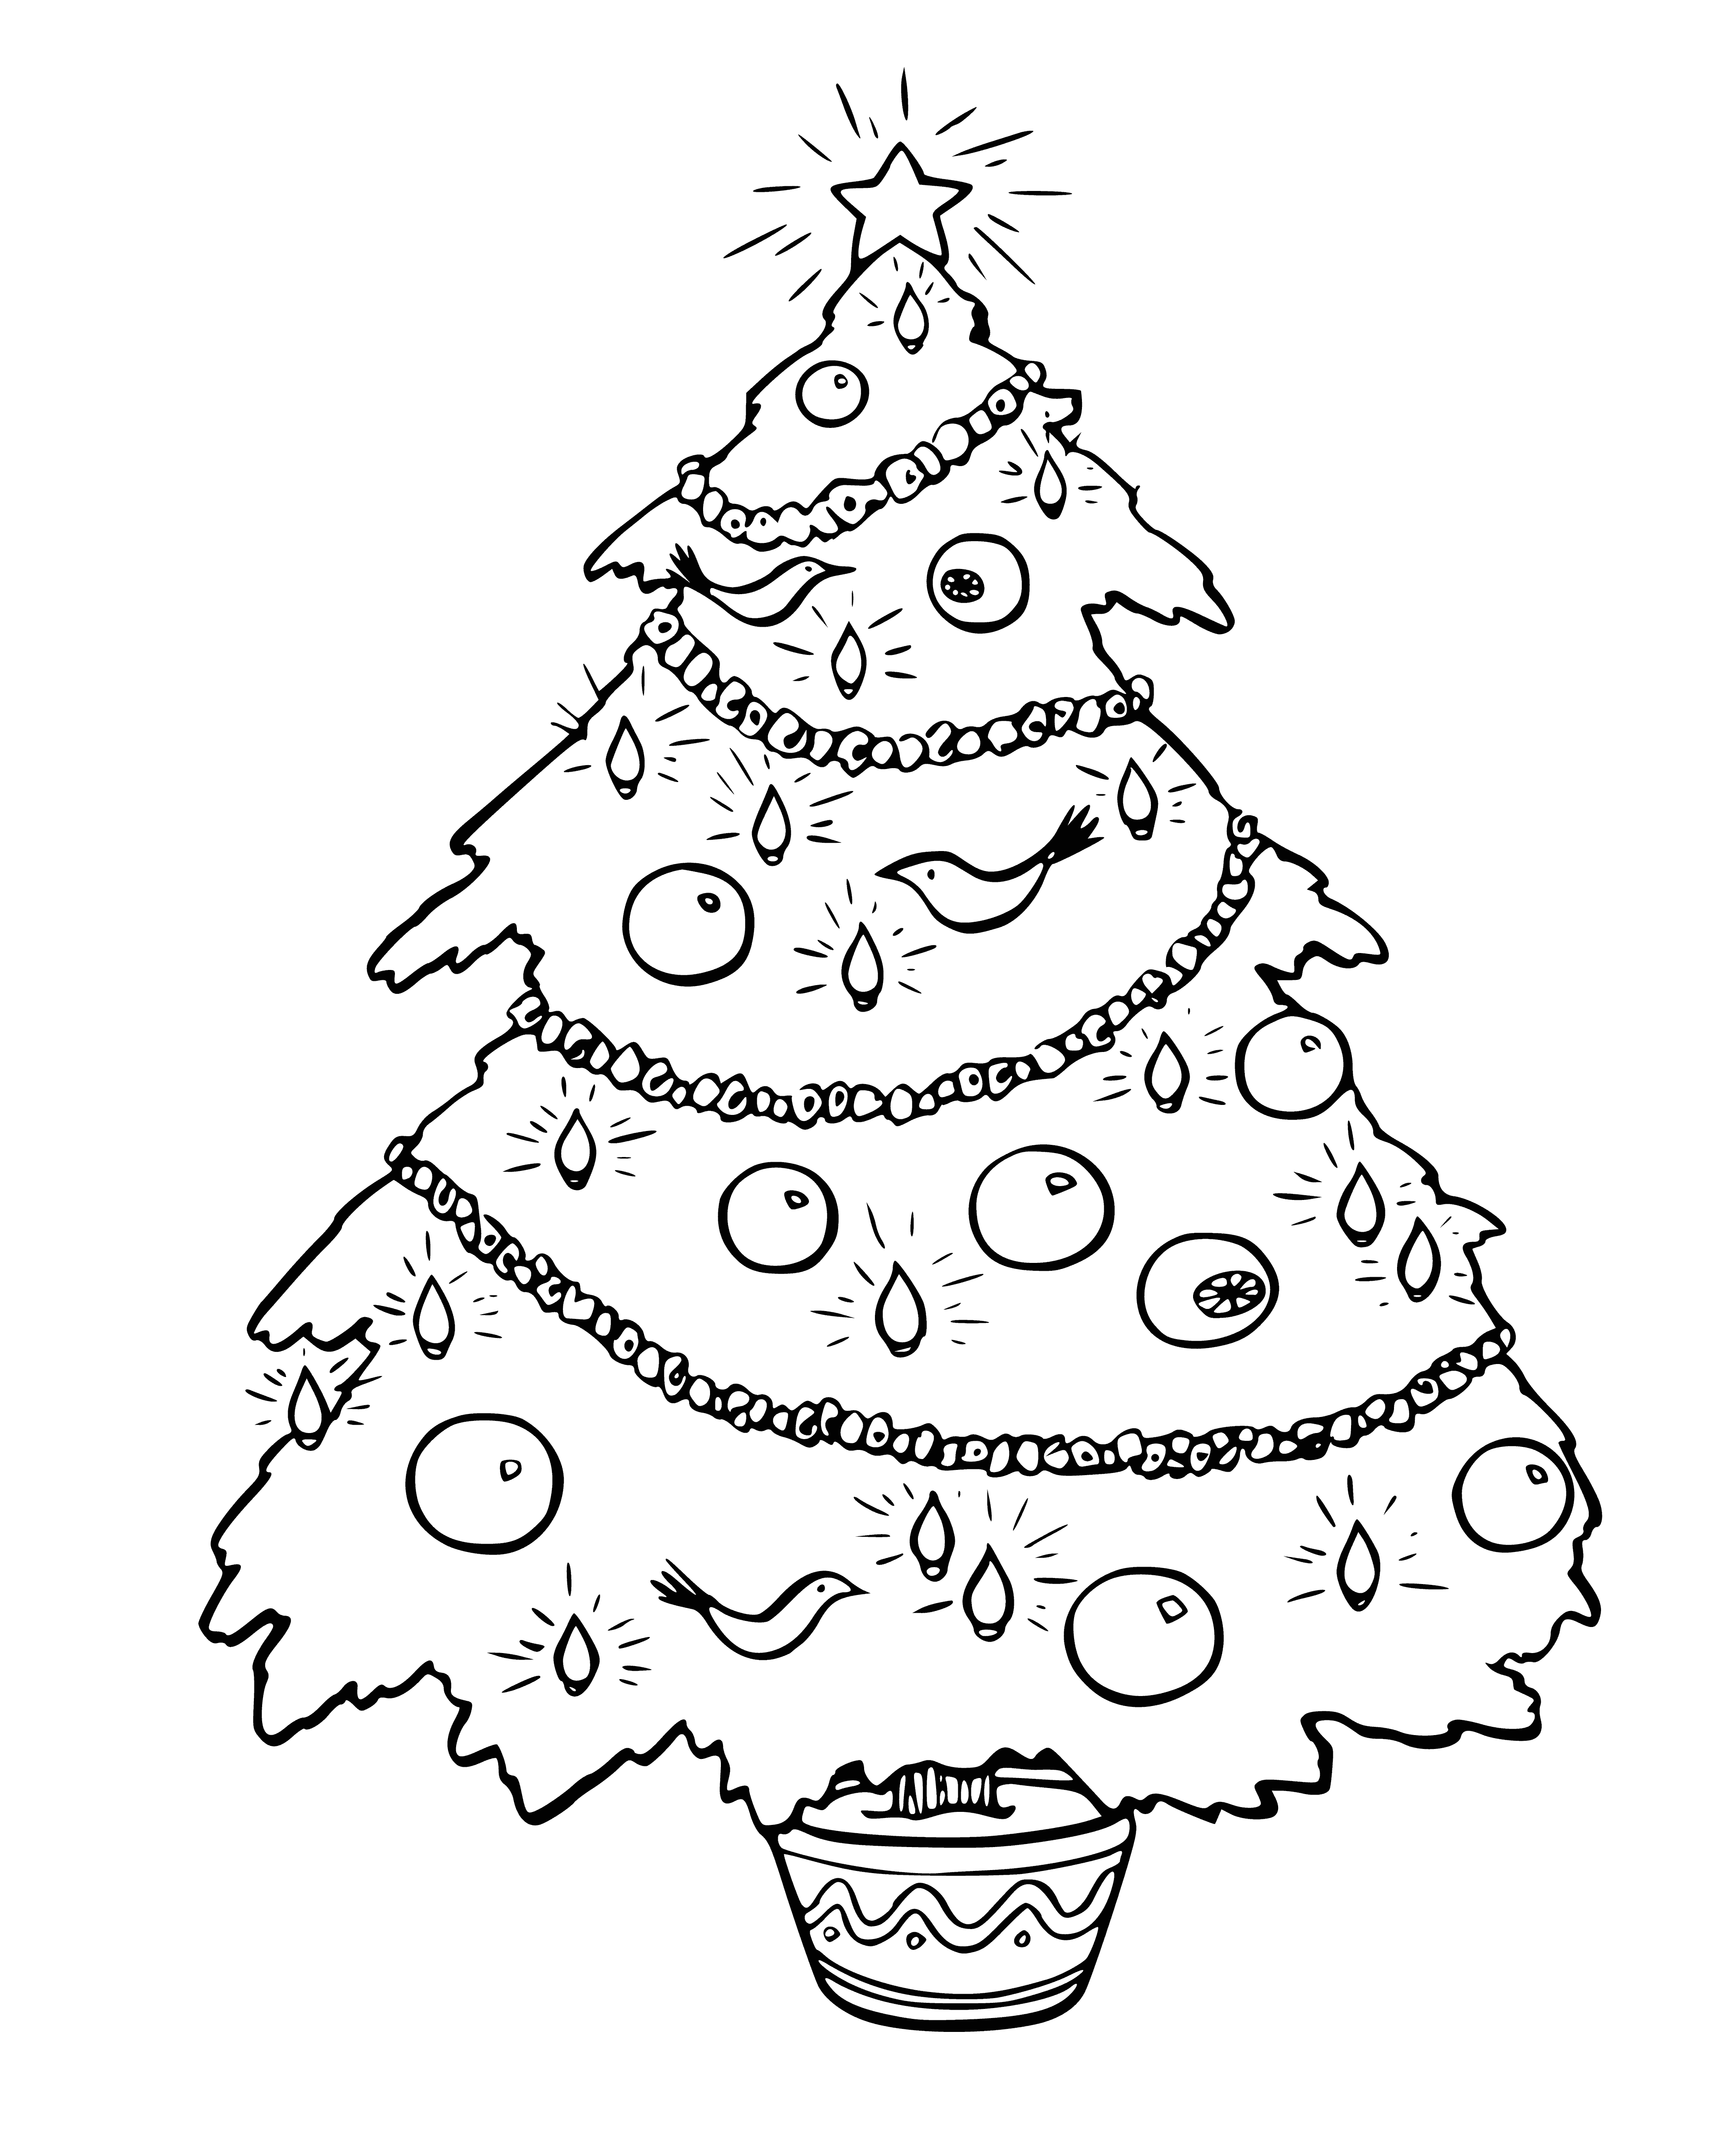 A Christmas tree with presents, topped with a star, and a mix of colors.